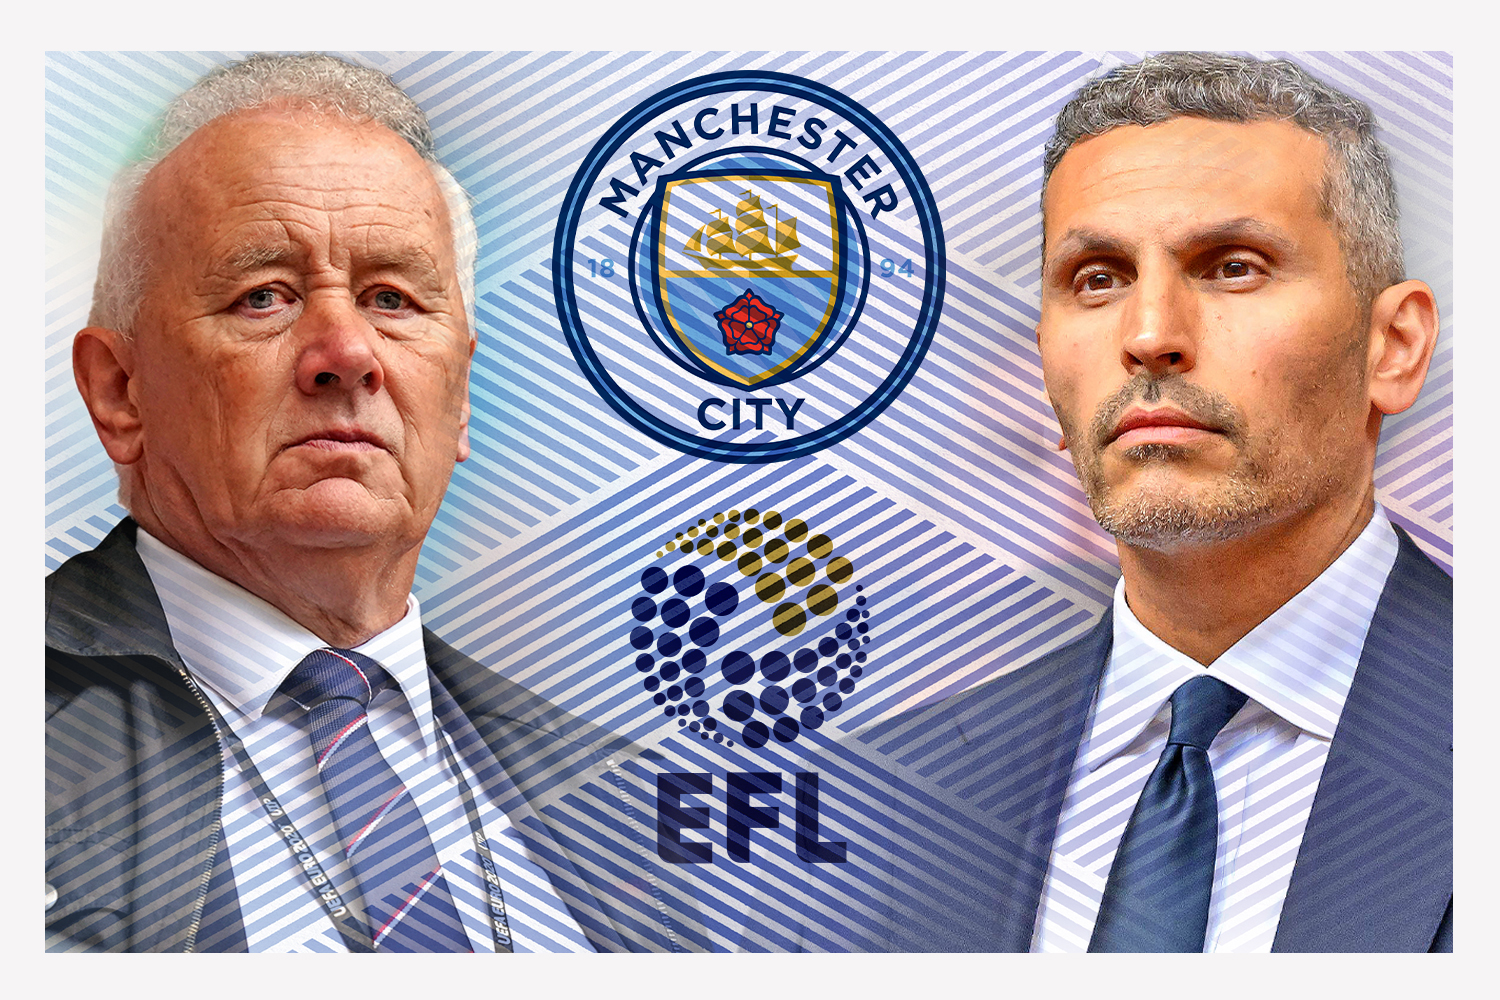 Premier League clubs are concerned about committing money to the EFL, chaired by Rick Parry, left, because of the legal action from City and their chairman Khaldoon Al Mubarak